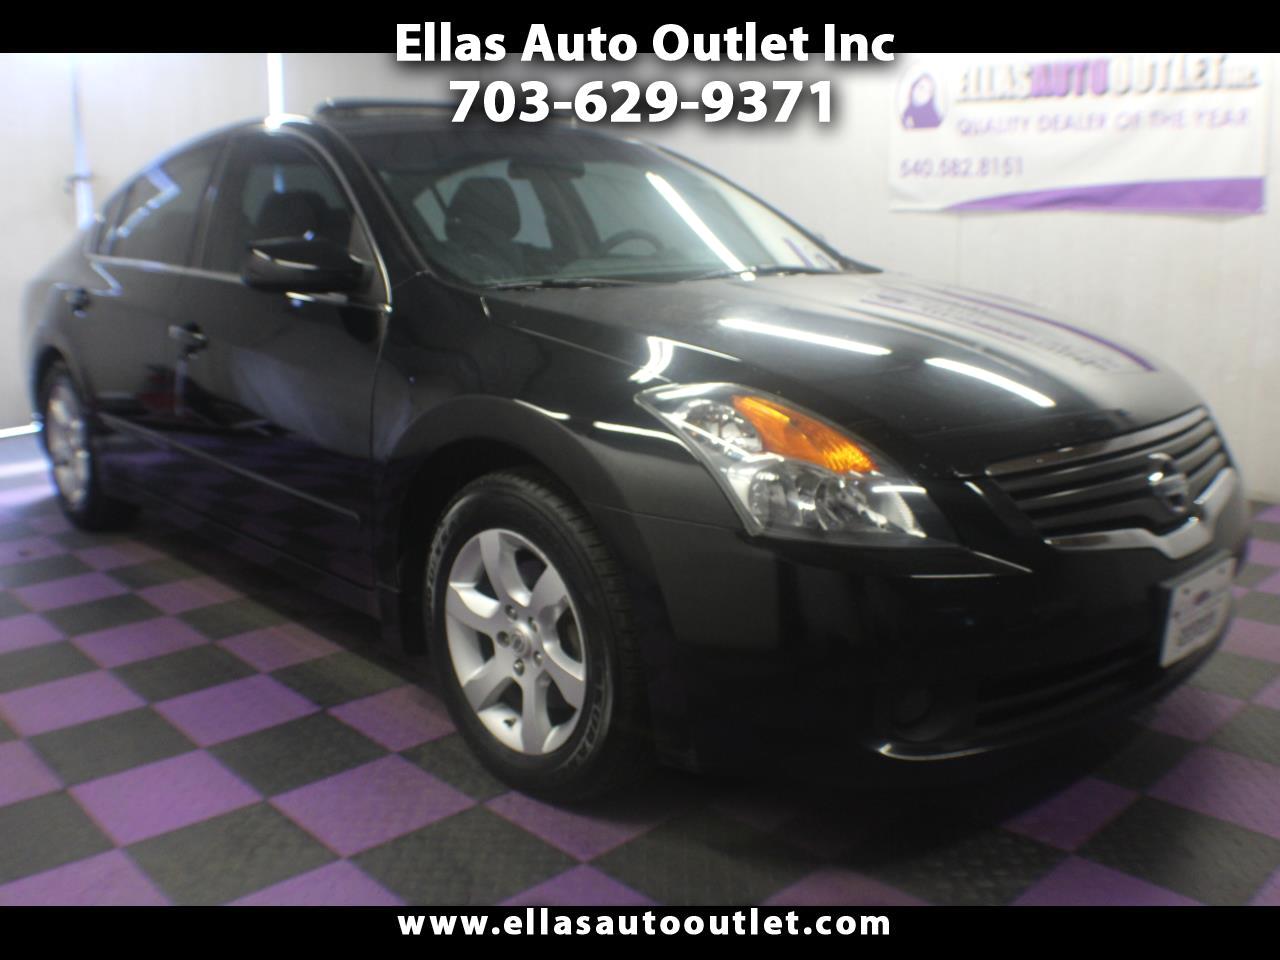 Used 2009 Nissan Altima 4dr Sdn I4 Cvt 2 5 S For Sale In